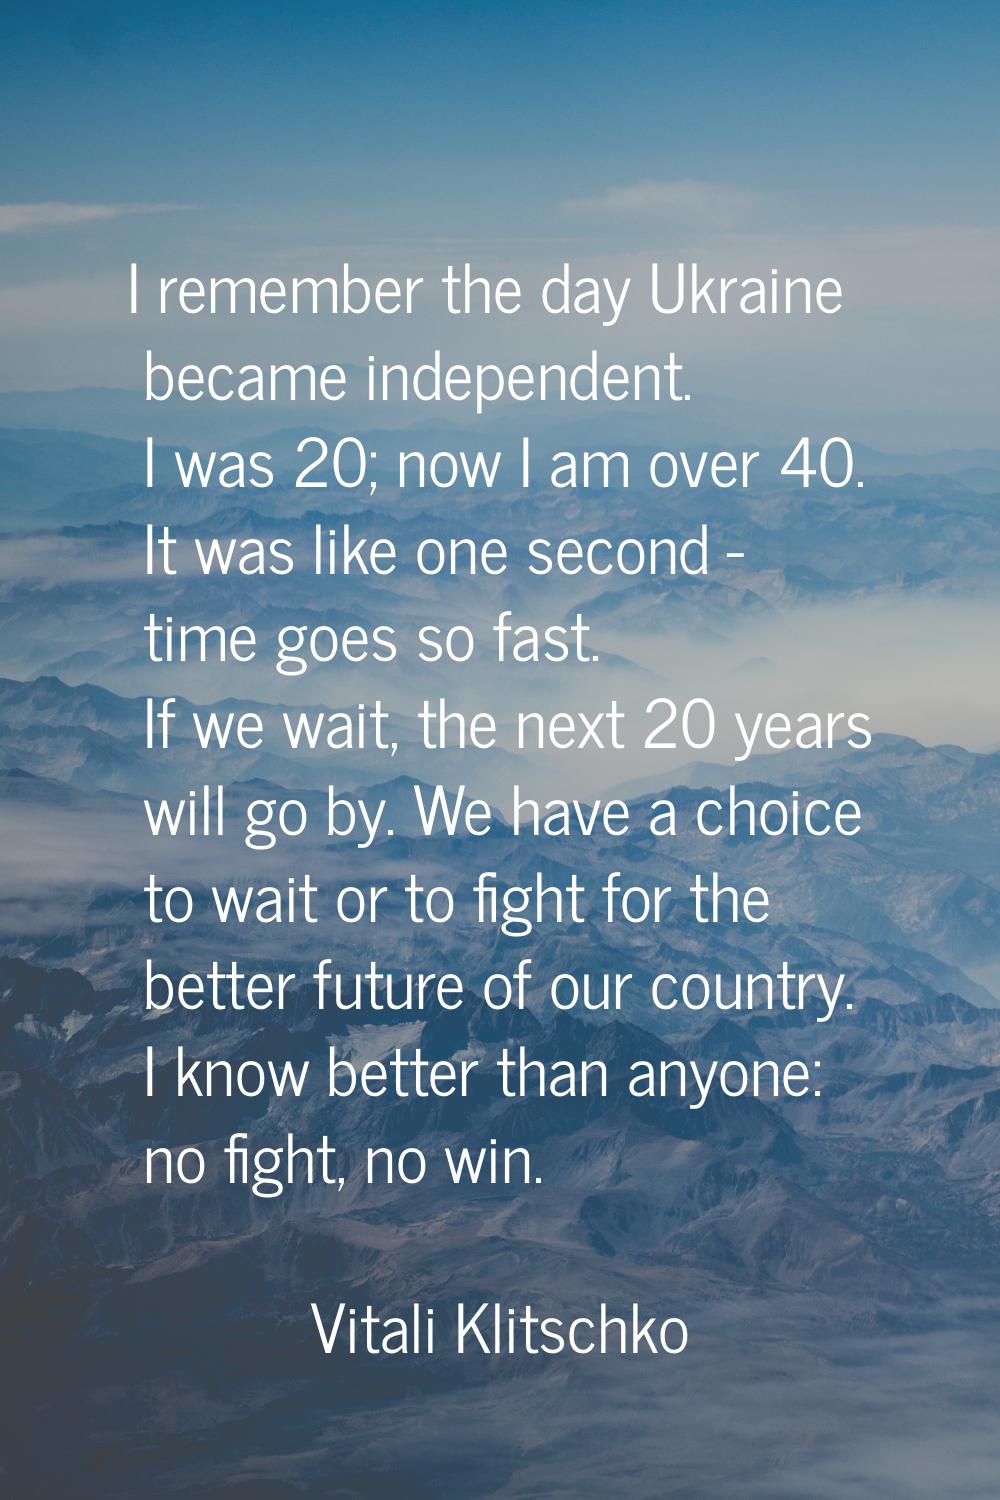 I remember the day Ukraine became independent. I was 20; now I am over 40. It was like one second -